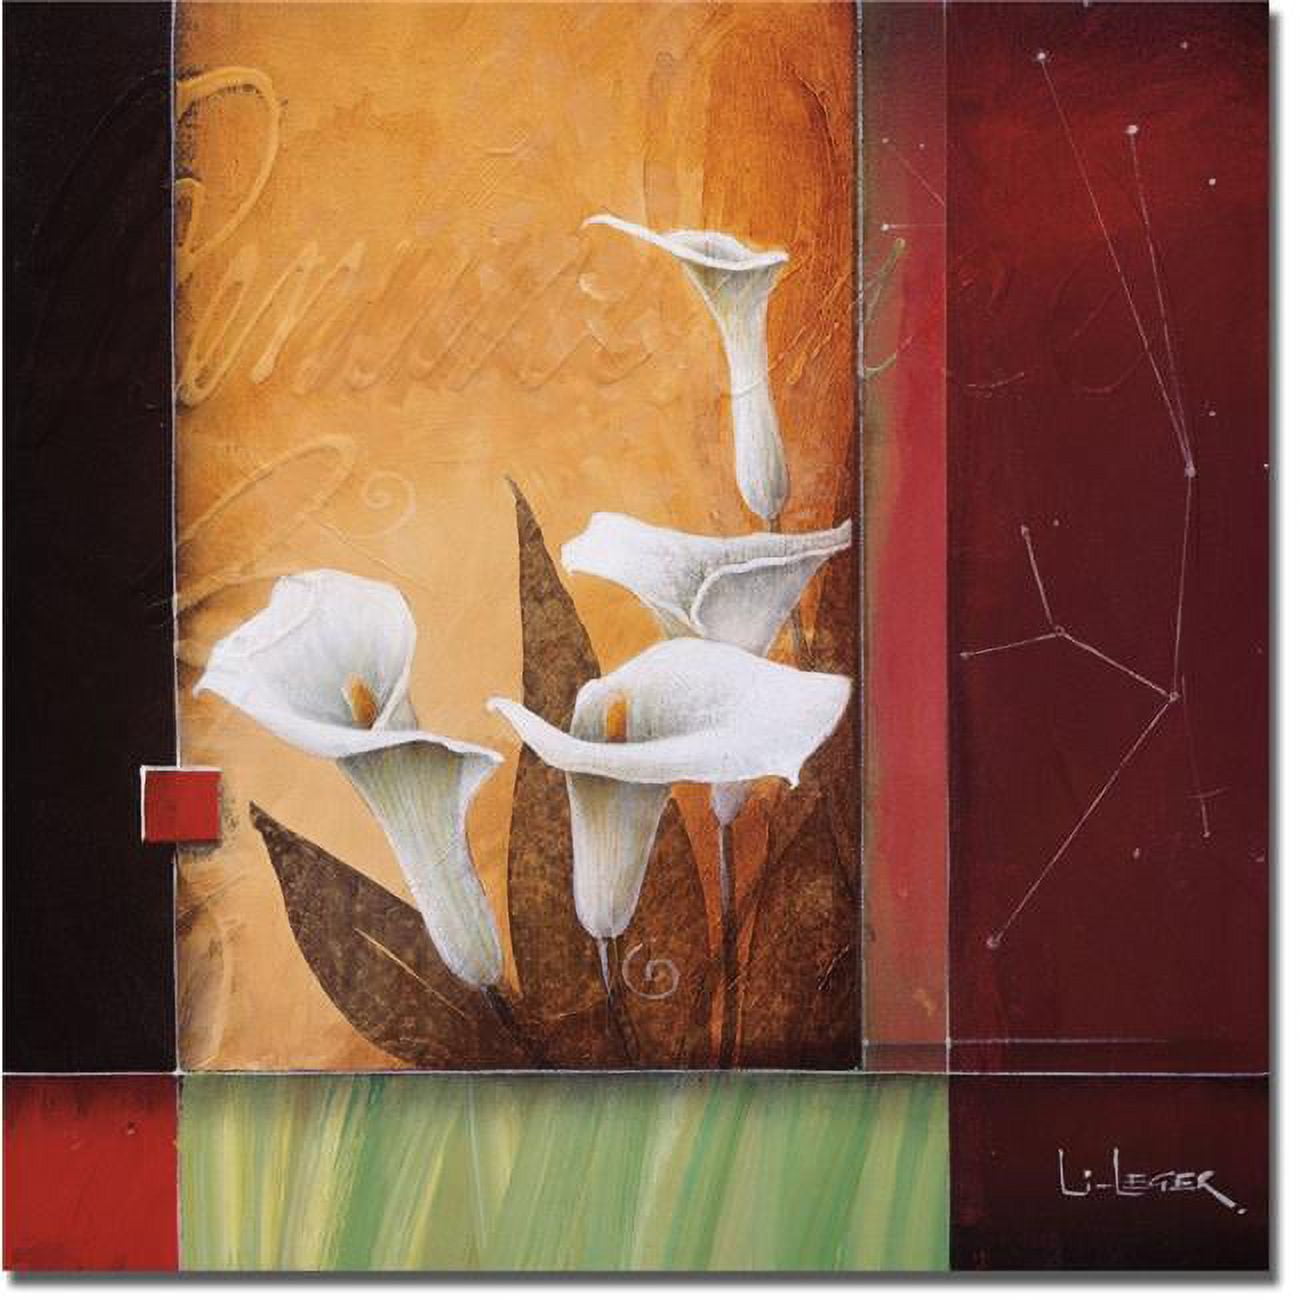 1212k778cg Reminiscence By Don Li-leger Premium Gallery-wrapped Canvas Giclee Art - 12 X 12 X 1.5 In.